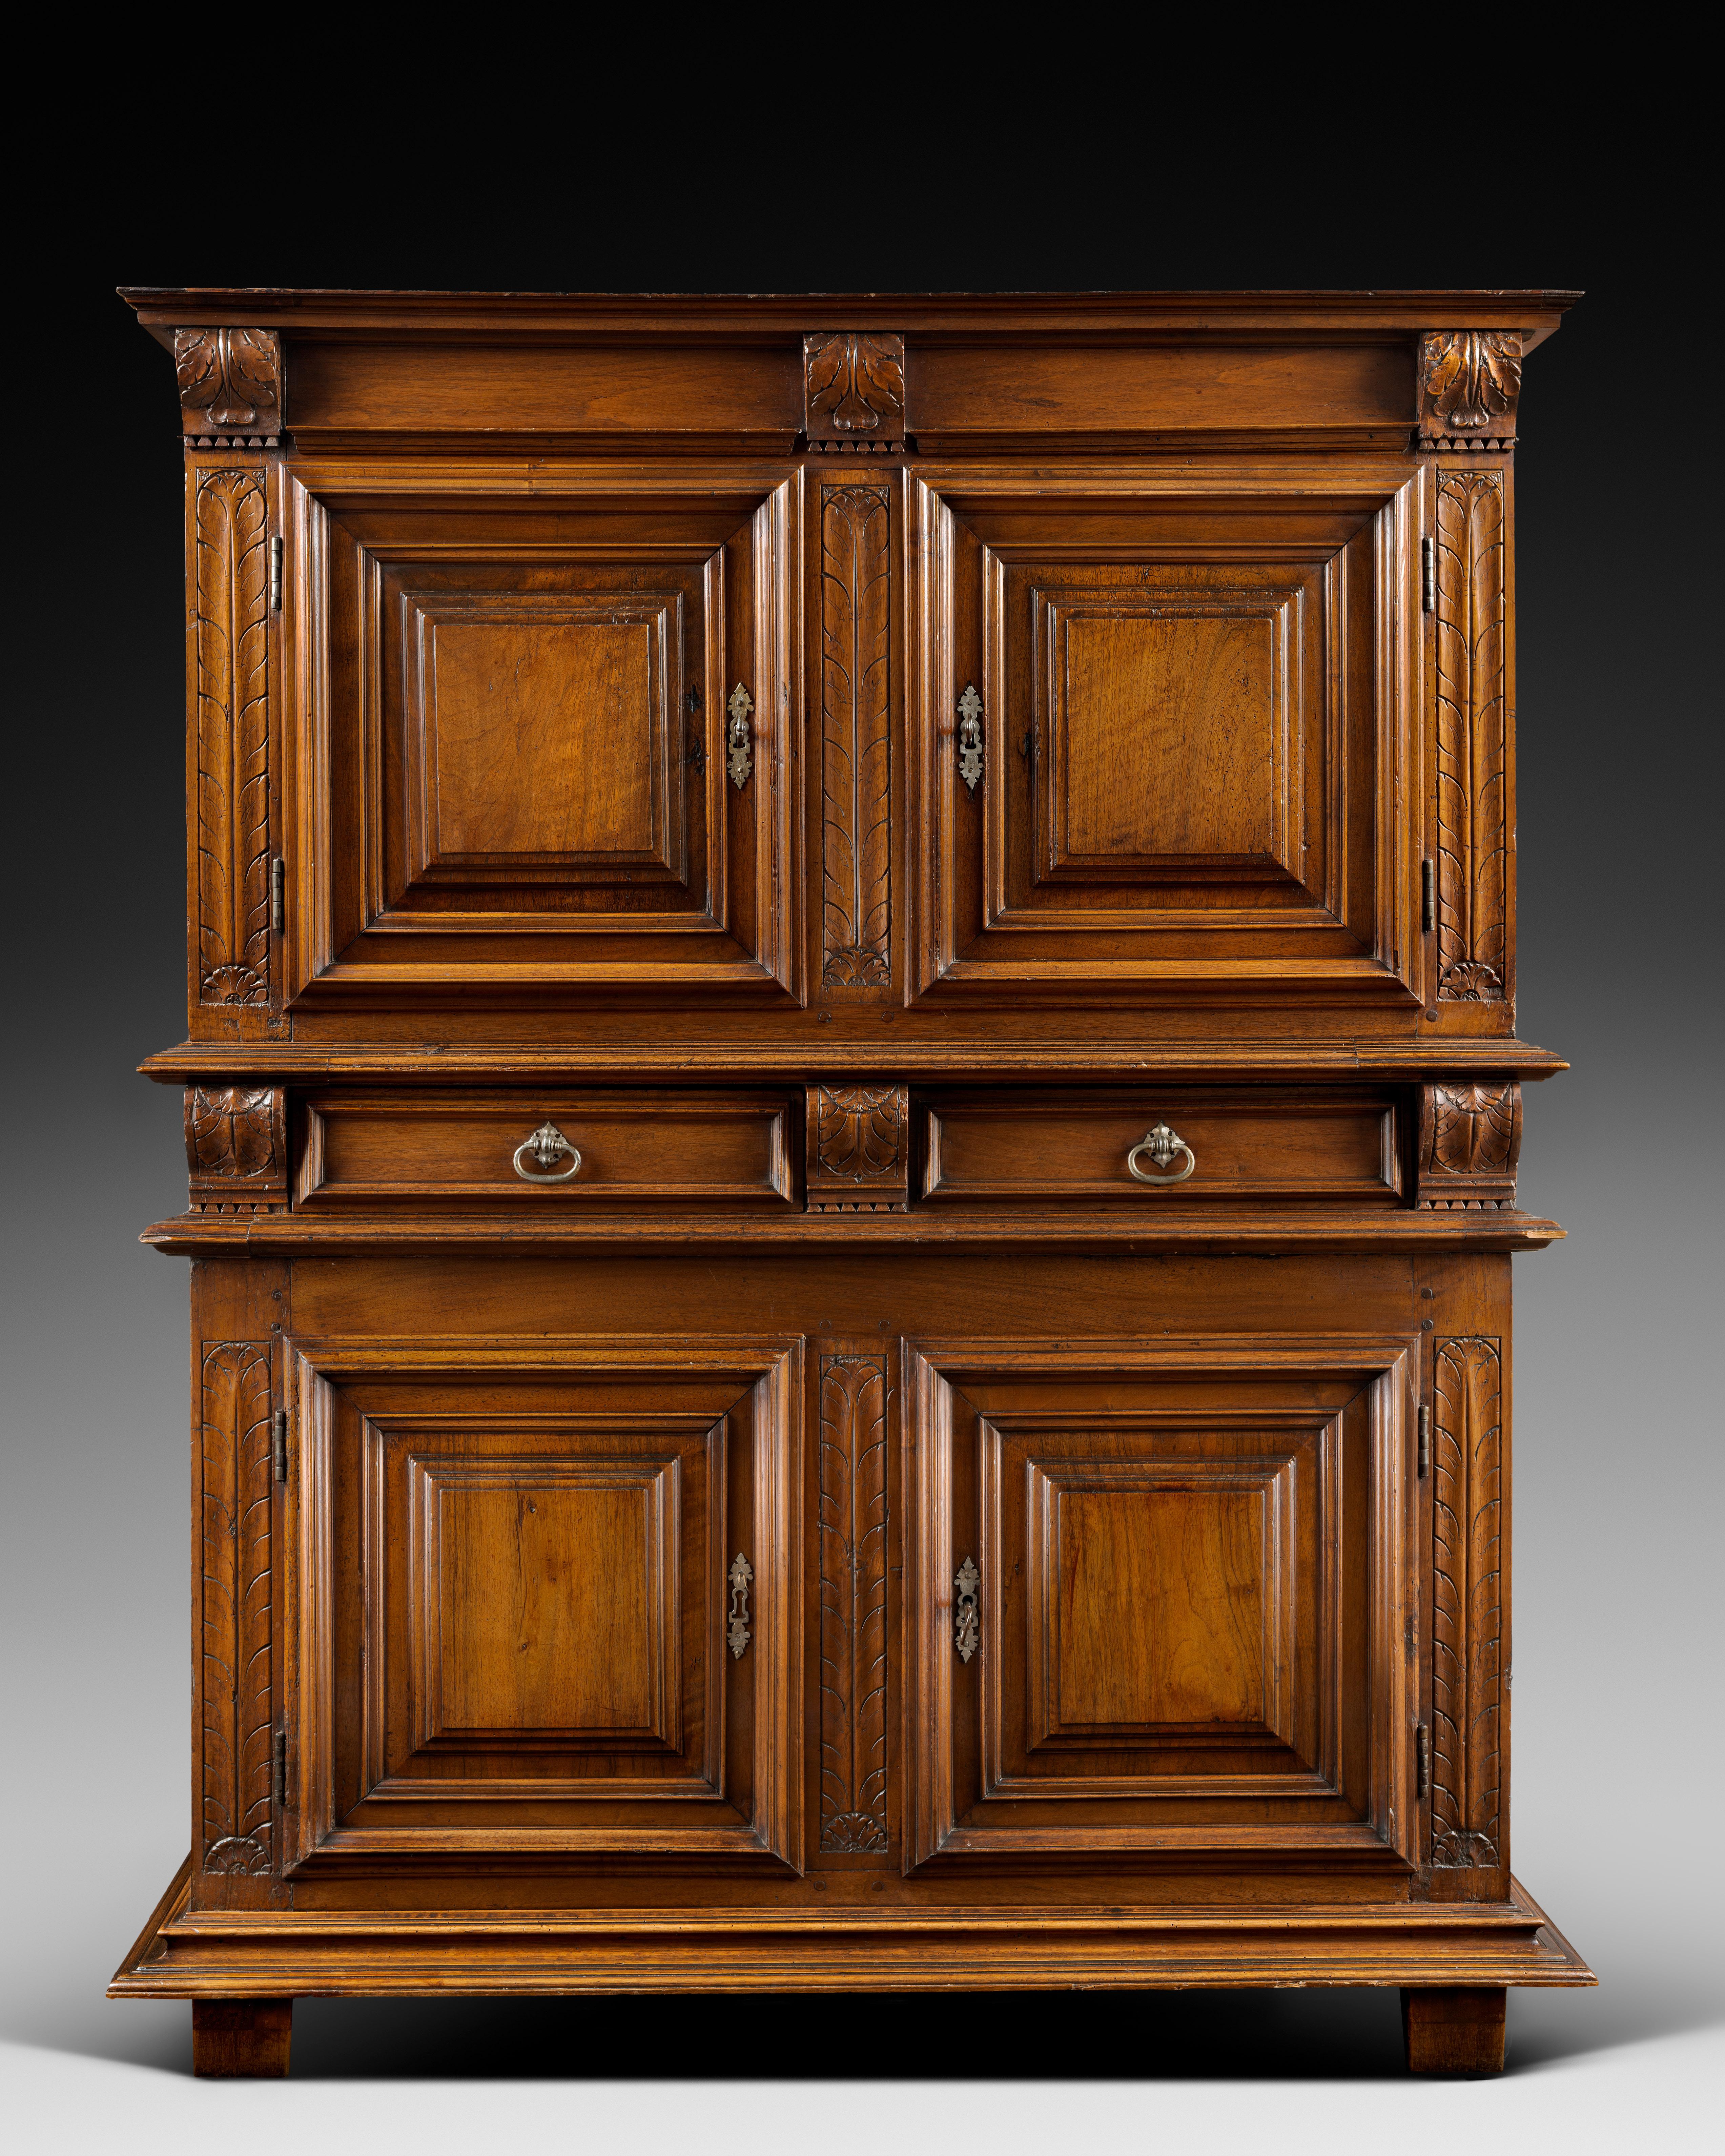 Renaissance cabinet with a quill-feather decor.

ORIGIN: FRANCE
PERIOD: 16th CENTURY

Height : 162 cm
Length : 134 cm
Depth : 54.5 cm


Blond walnut


This beautiful Renaissance cabinet consists of two parts, the upper part of which is